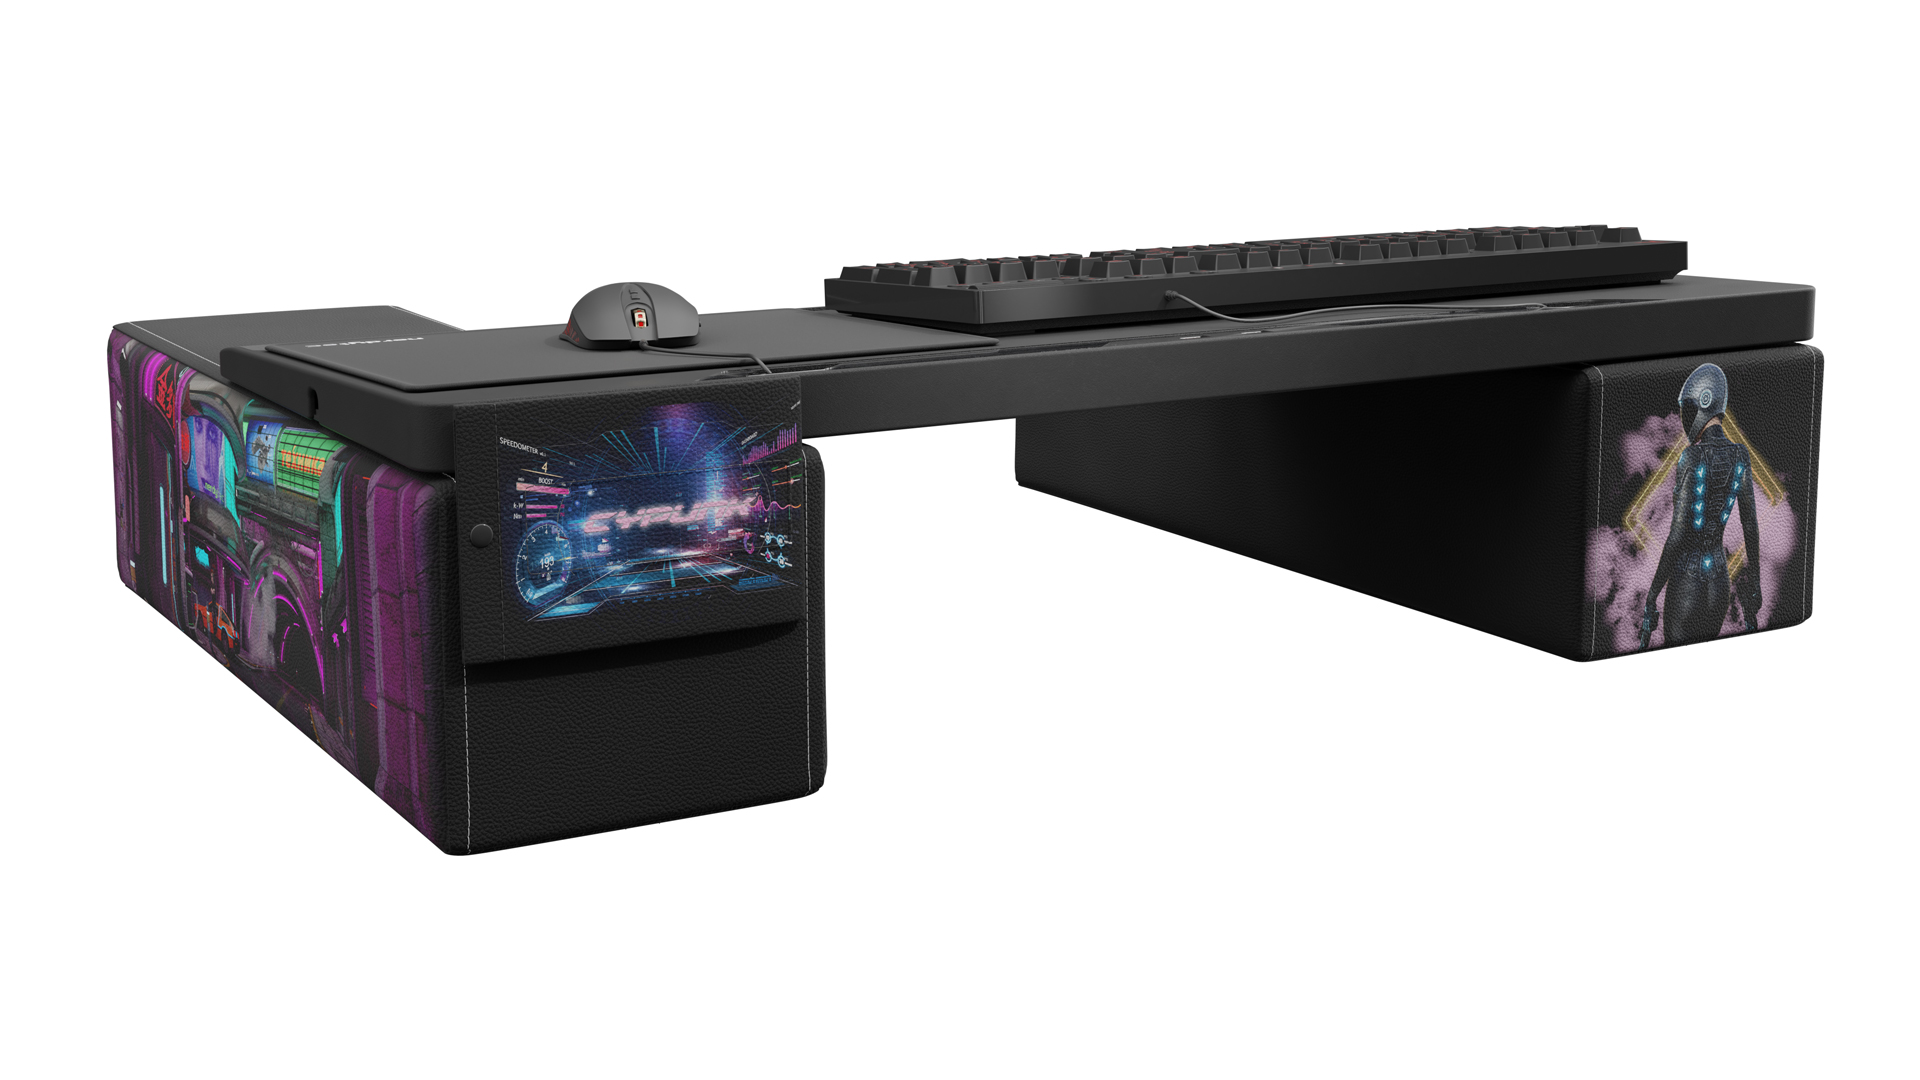 Couchmaster Cycon 2 Lapdesk, Couch Gaming